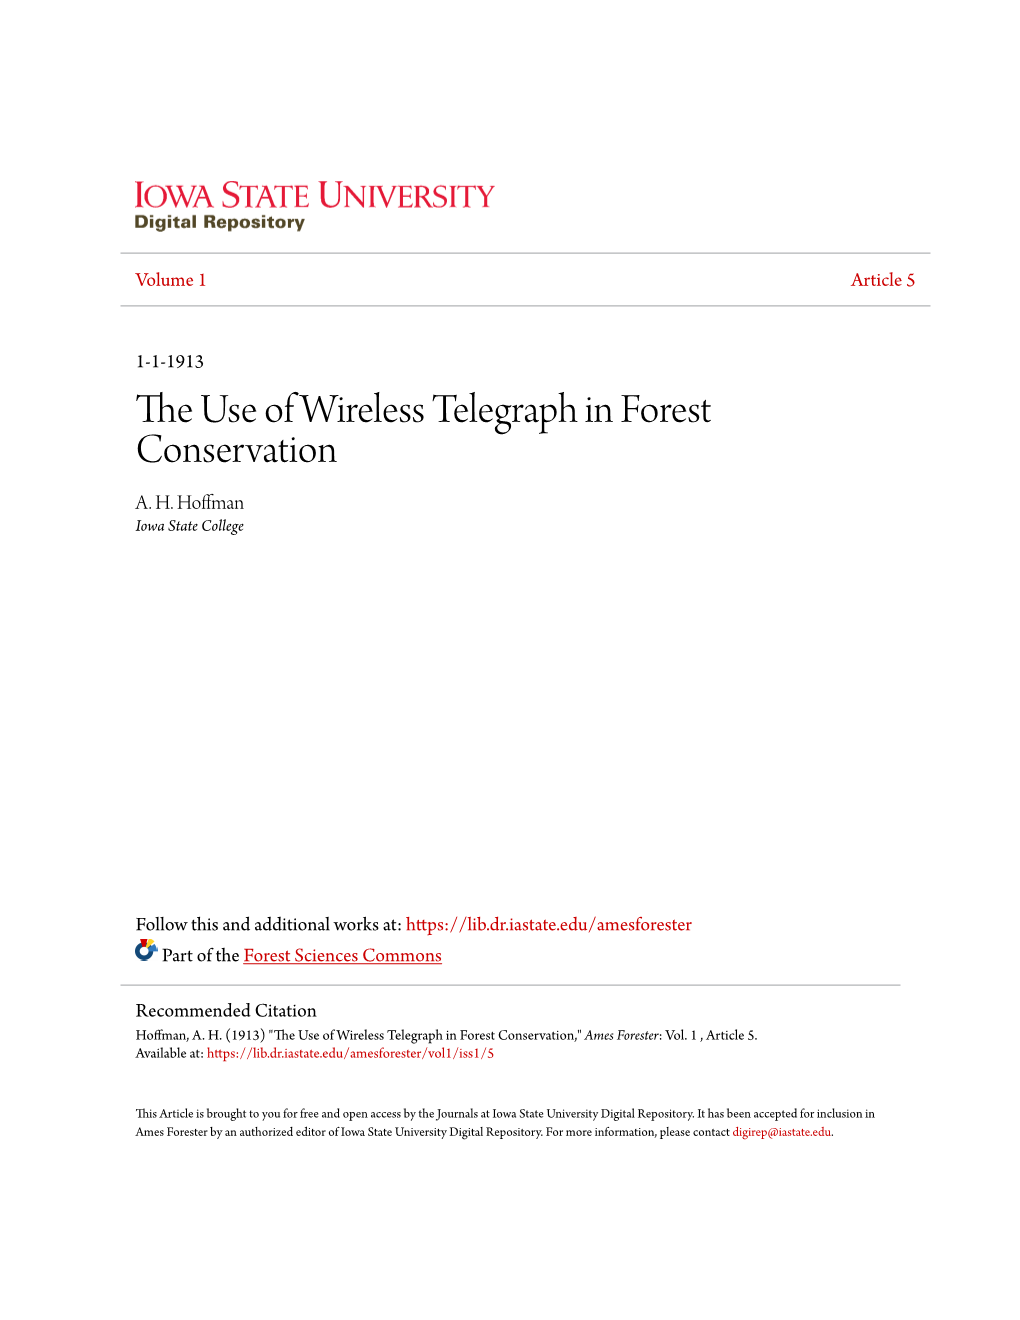 The Use of Wireless Telegraph in Forest Conservation